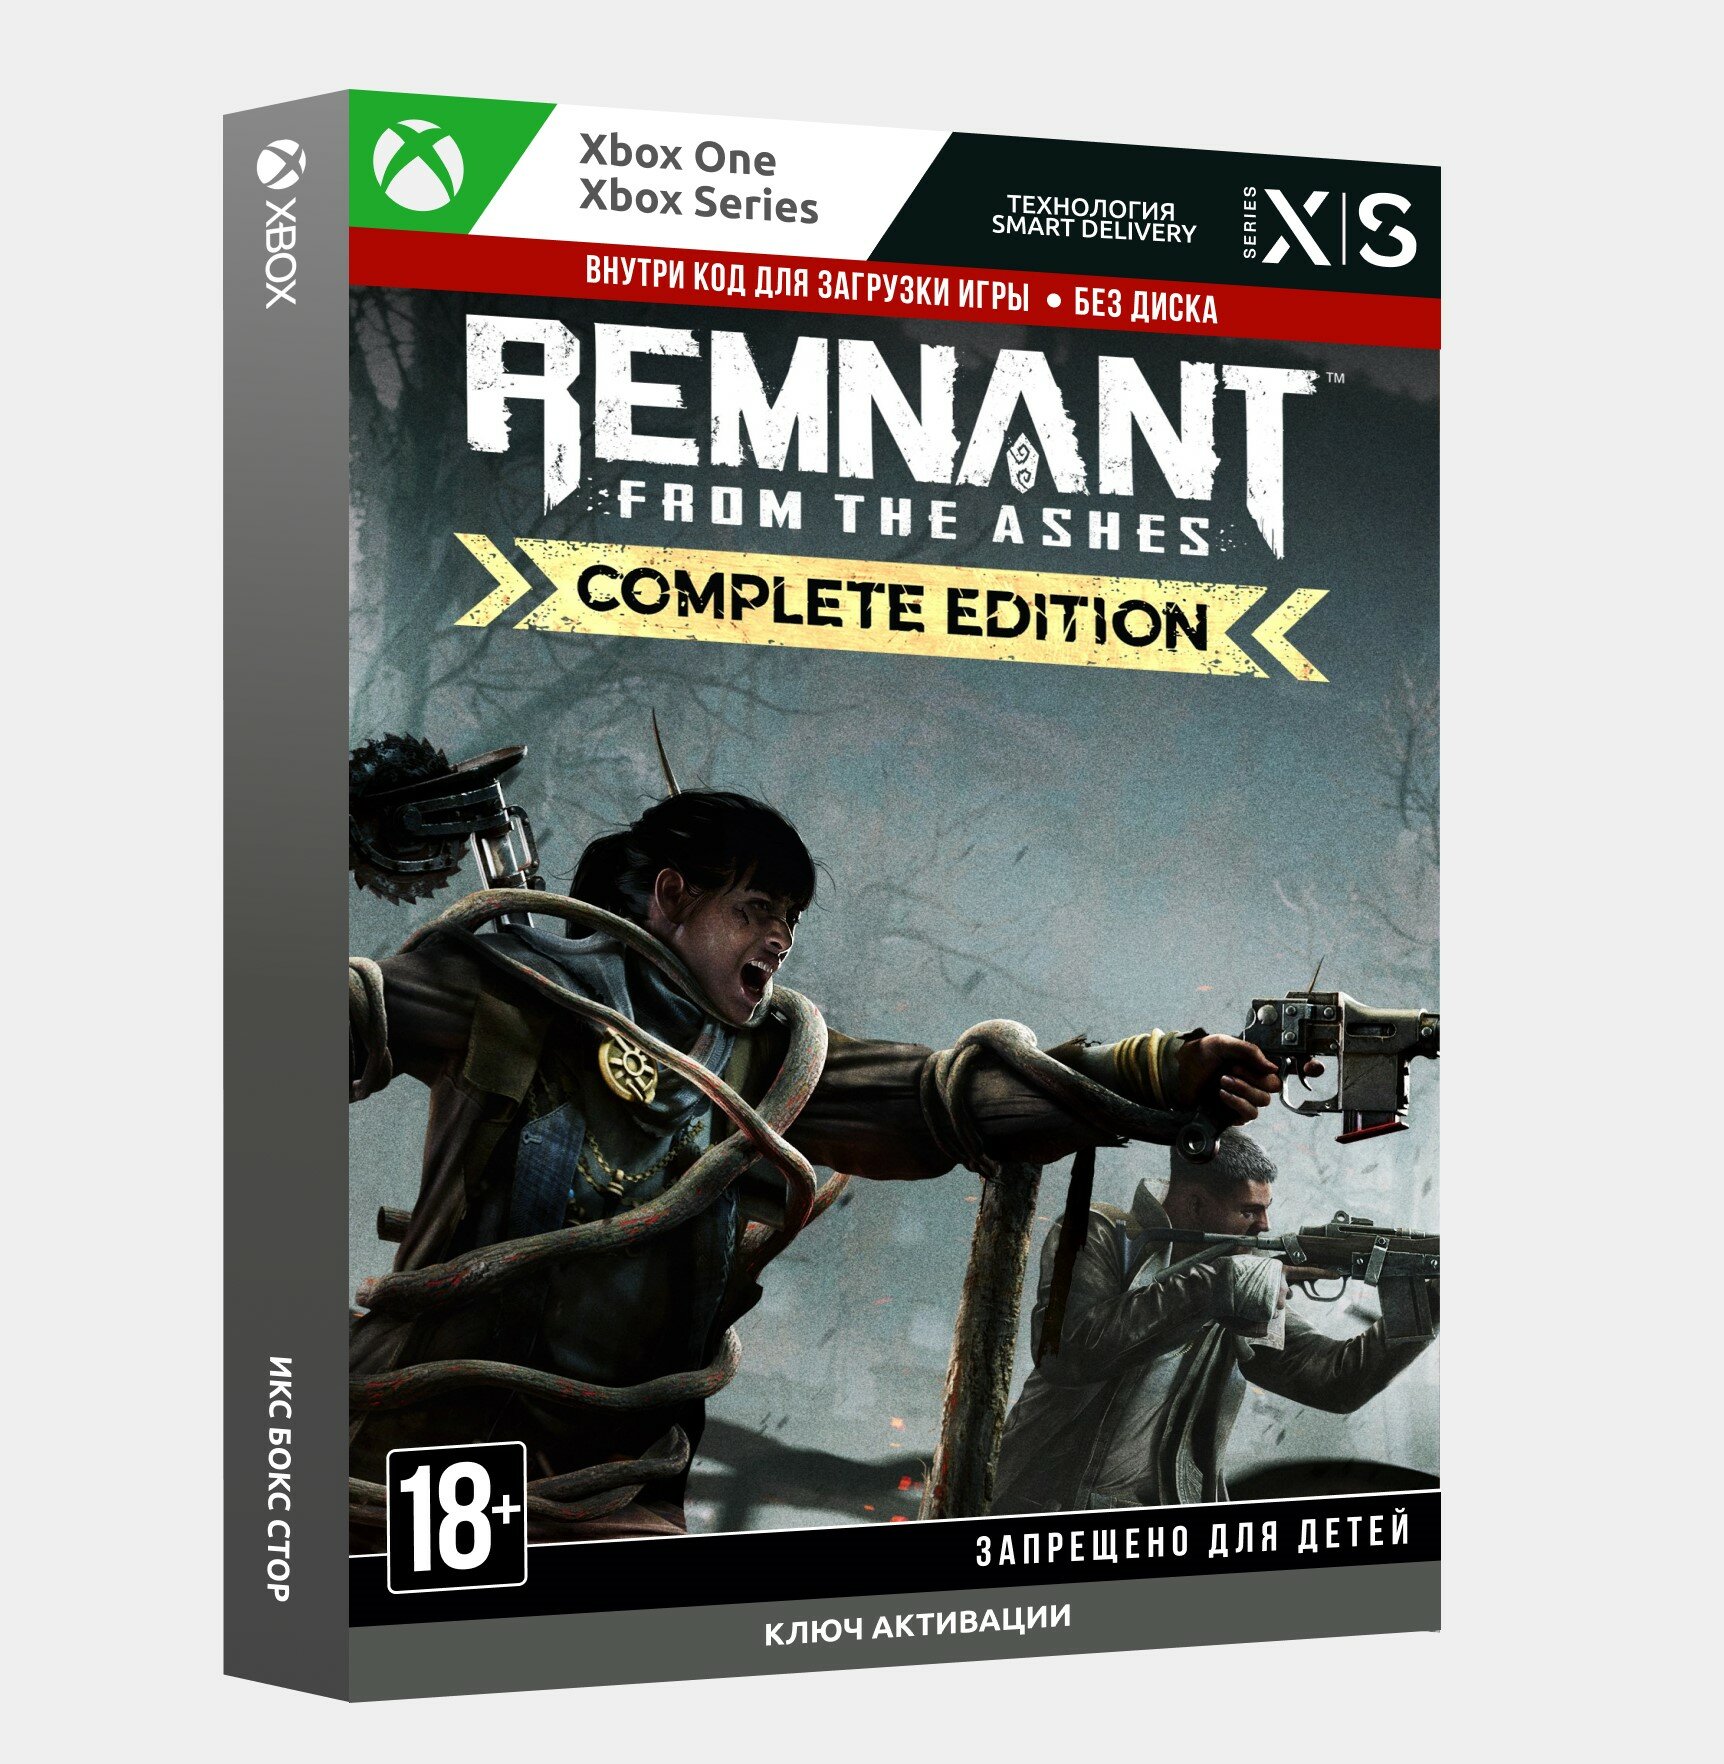 Игра Remnant: From the Ashes – Complete Edition для Xbox One/Series X|S, Русский язык, электронный ключ Аргентина